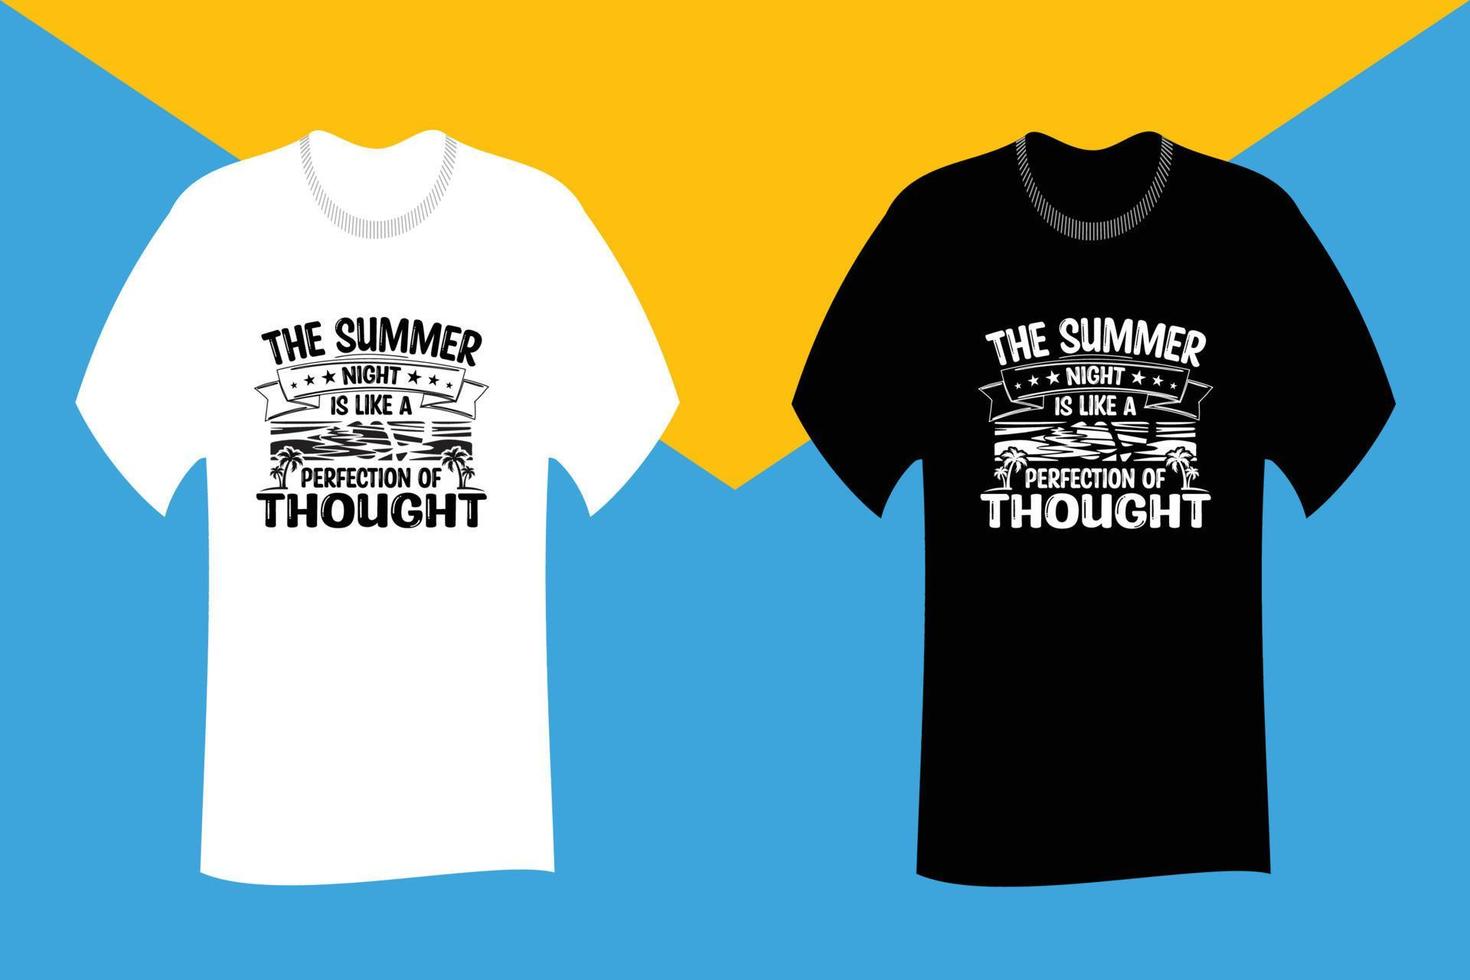 The Summer Night is like a perfection of thought T Shirt vector